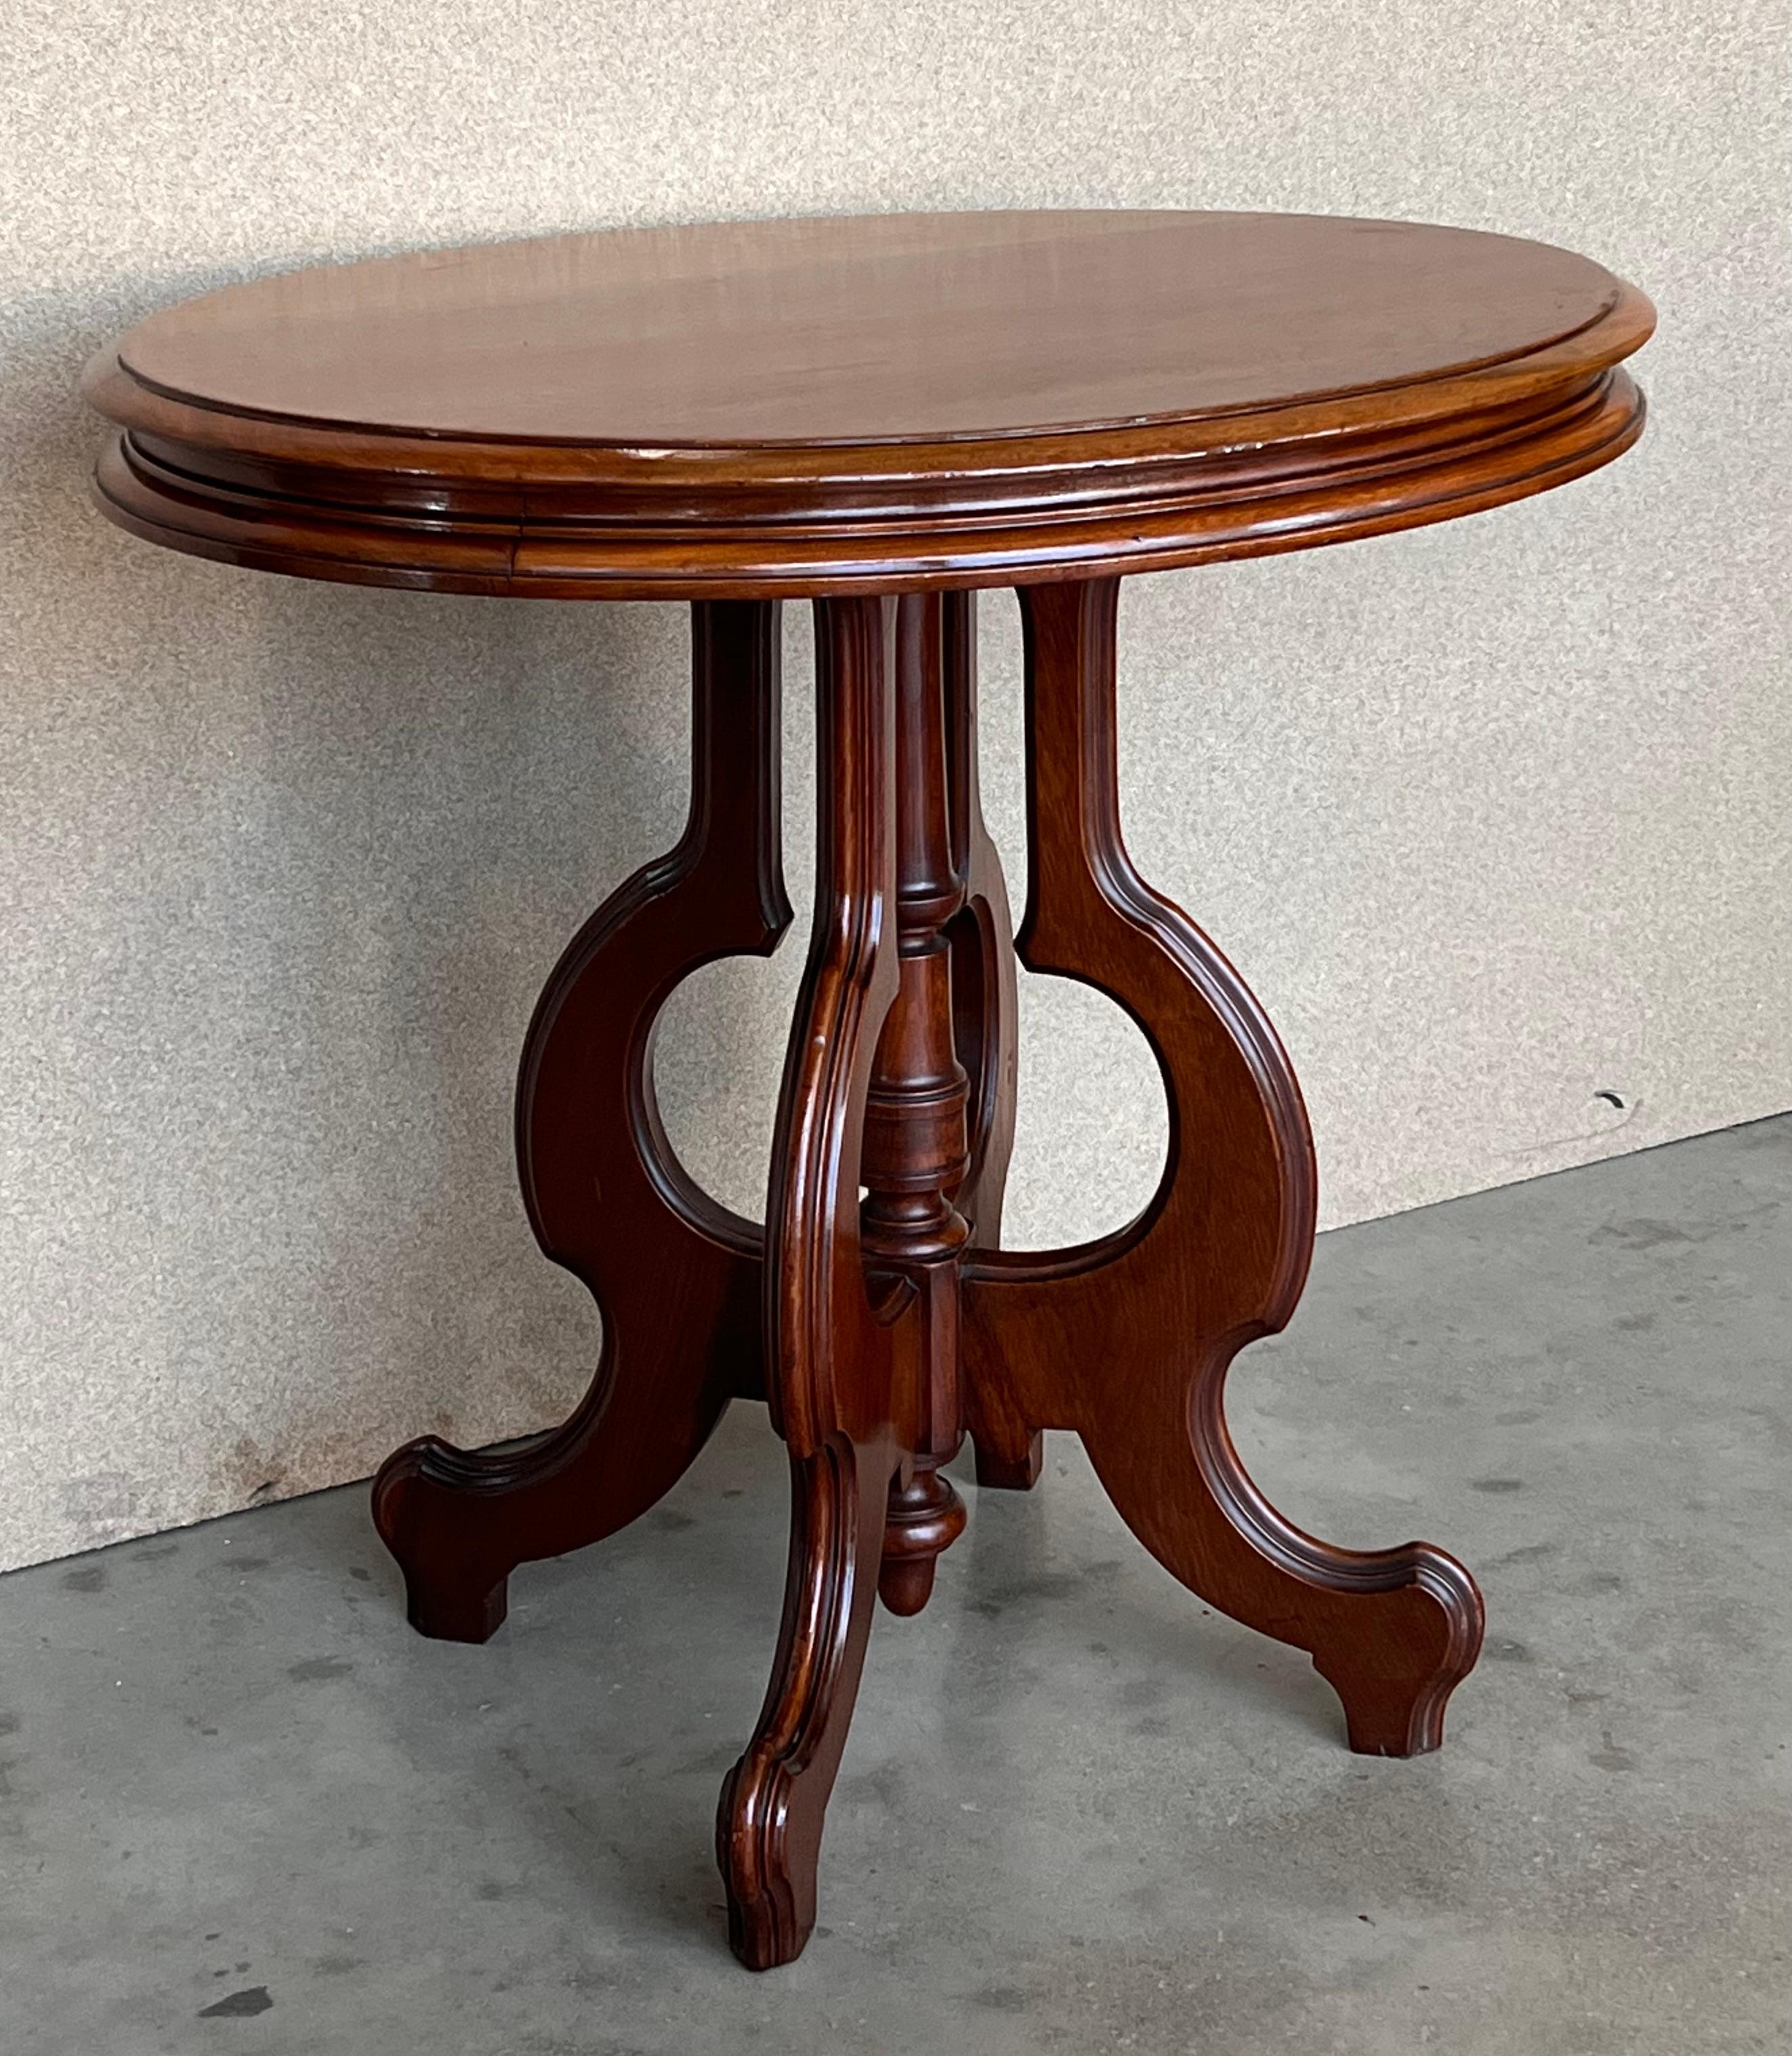 Victorian Burr Walnut Inlaid Oval Coffee Table In Good Condition For Sale In Miami, FL